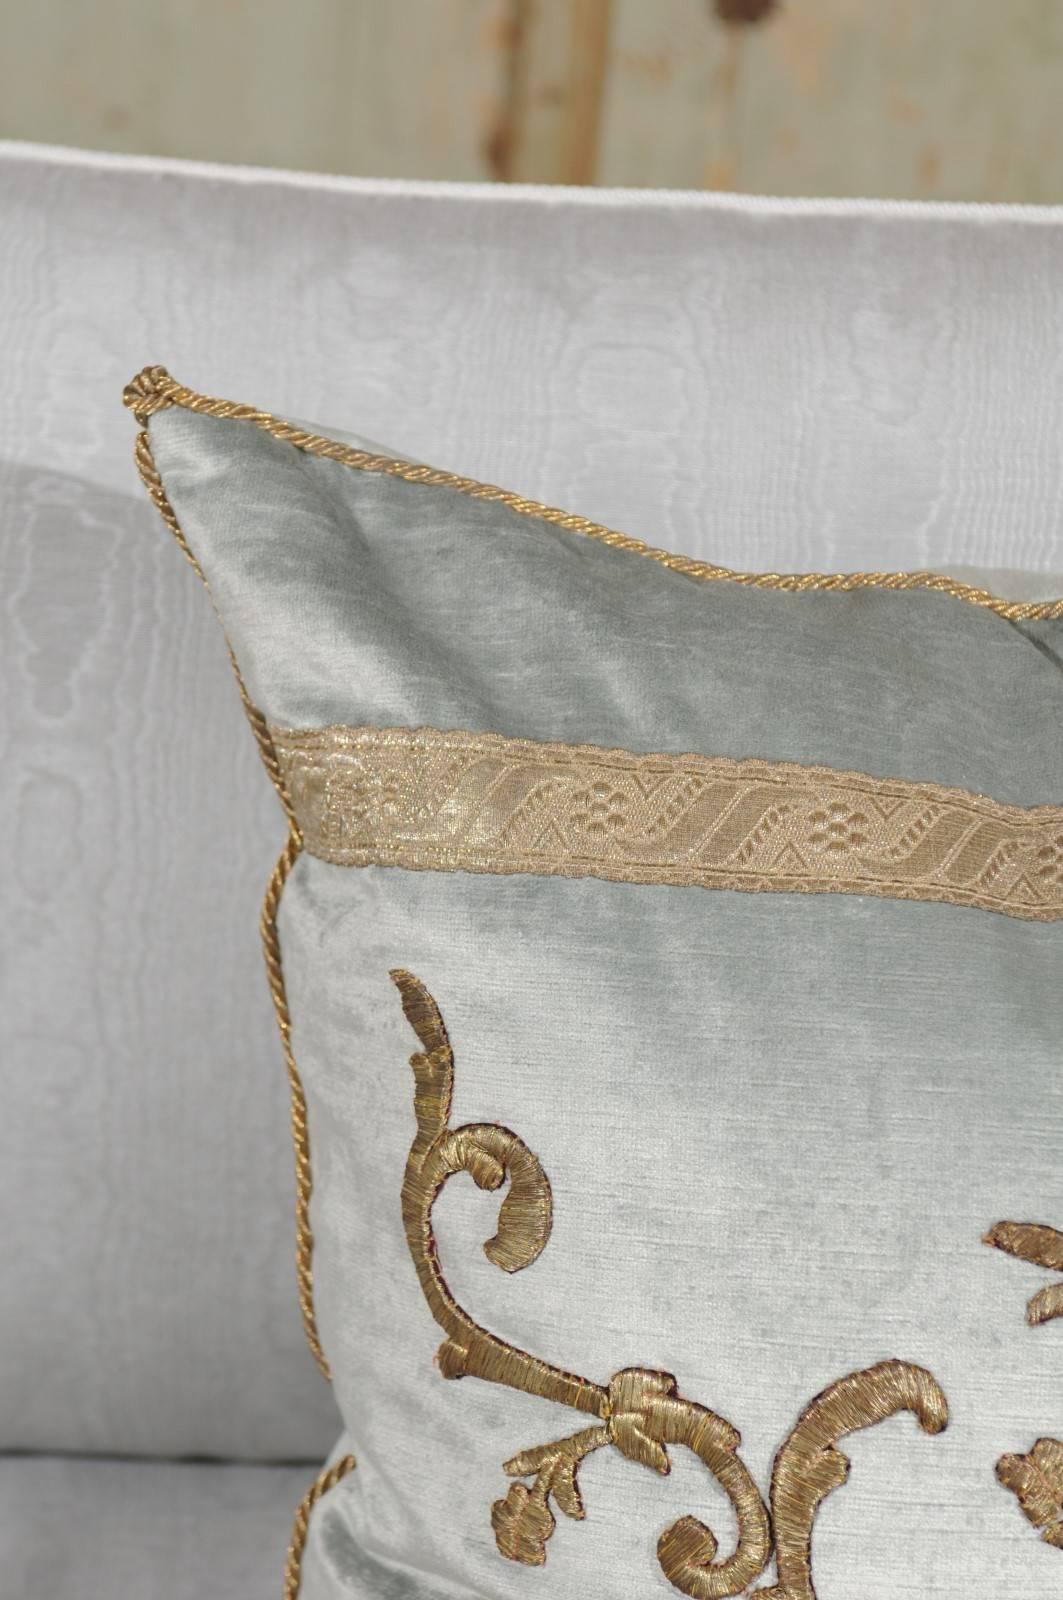 American Pale French Blue Velvet Pillow Made of Ottoman Empire Gold Metallic Embroidery